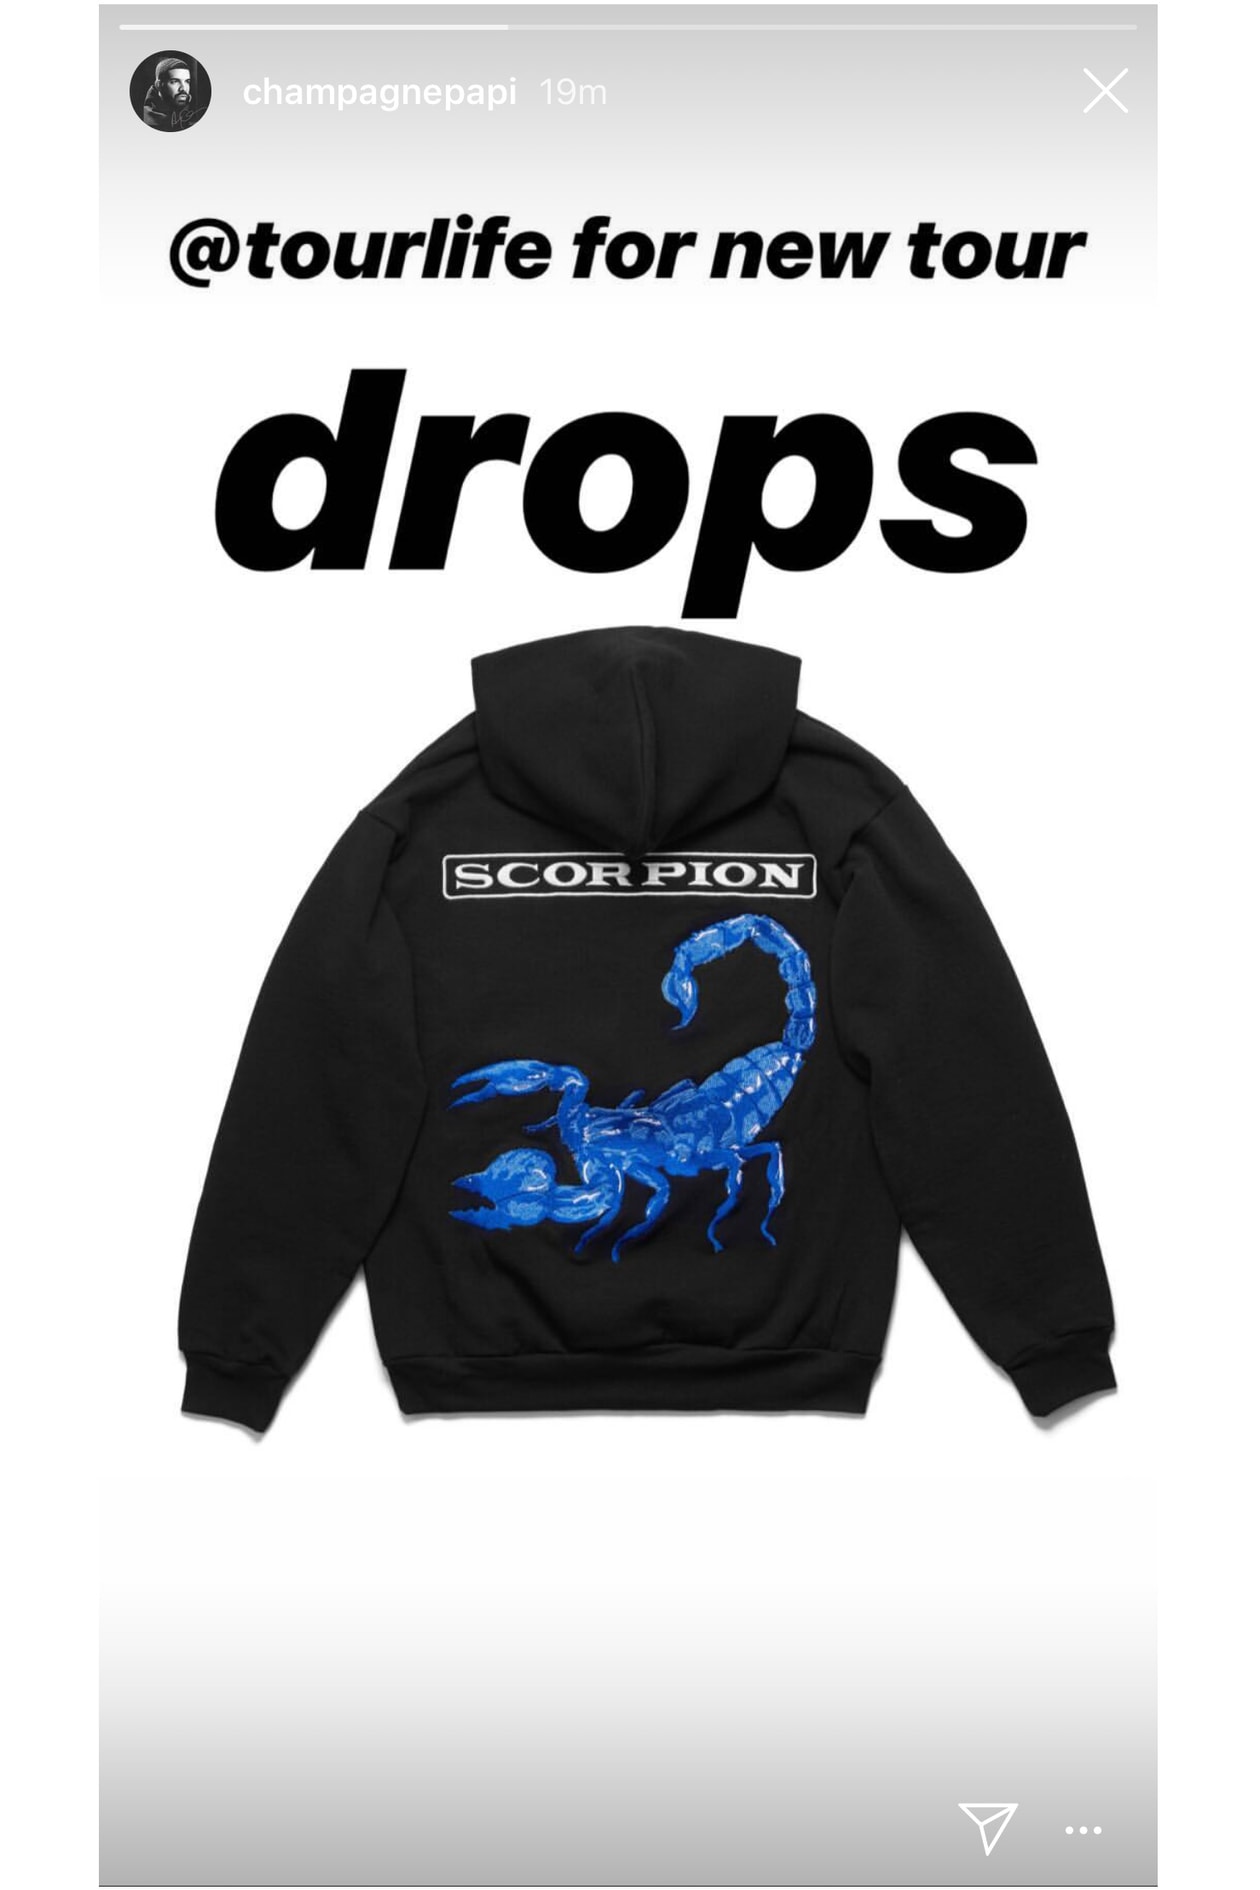 Drake Scorpion Merch instagram page aubrey and the three migos tour ovo october's very own